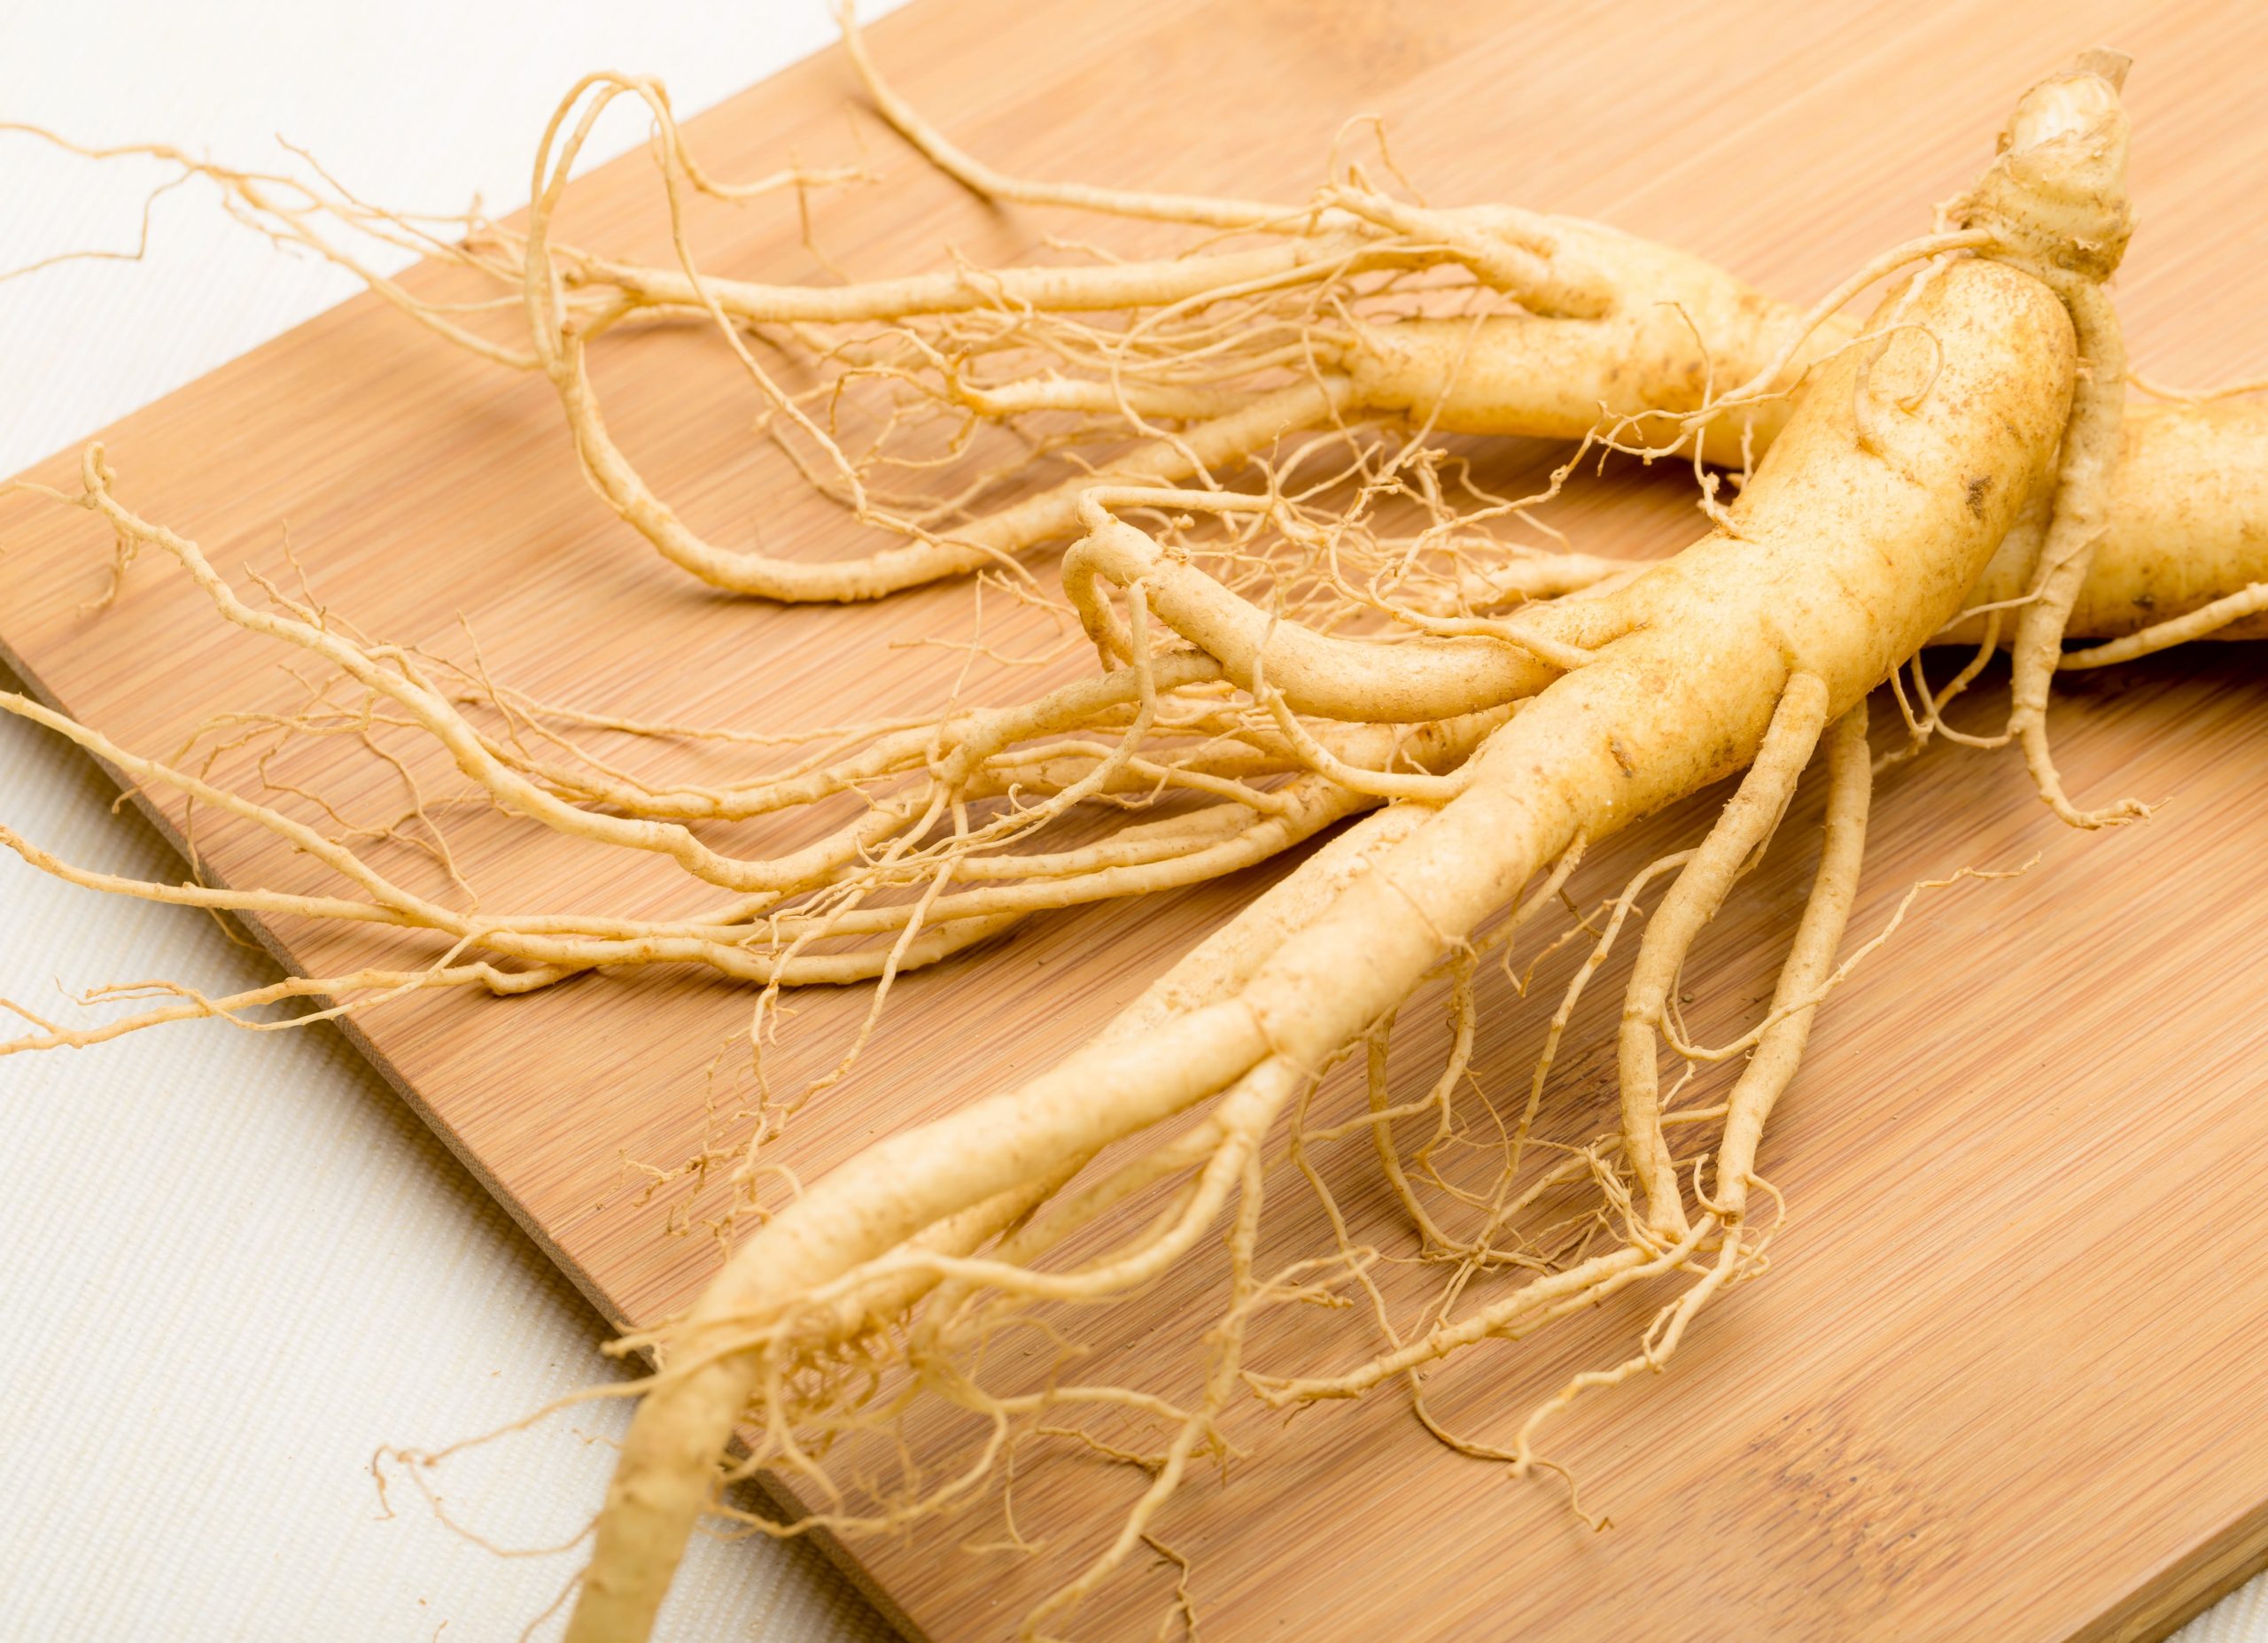 The Different Health Benefits of Ginseng